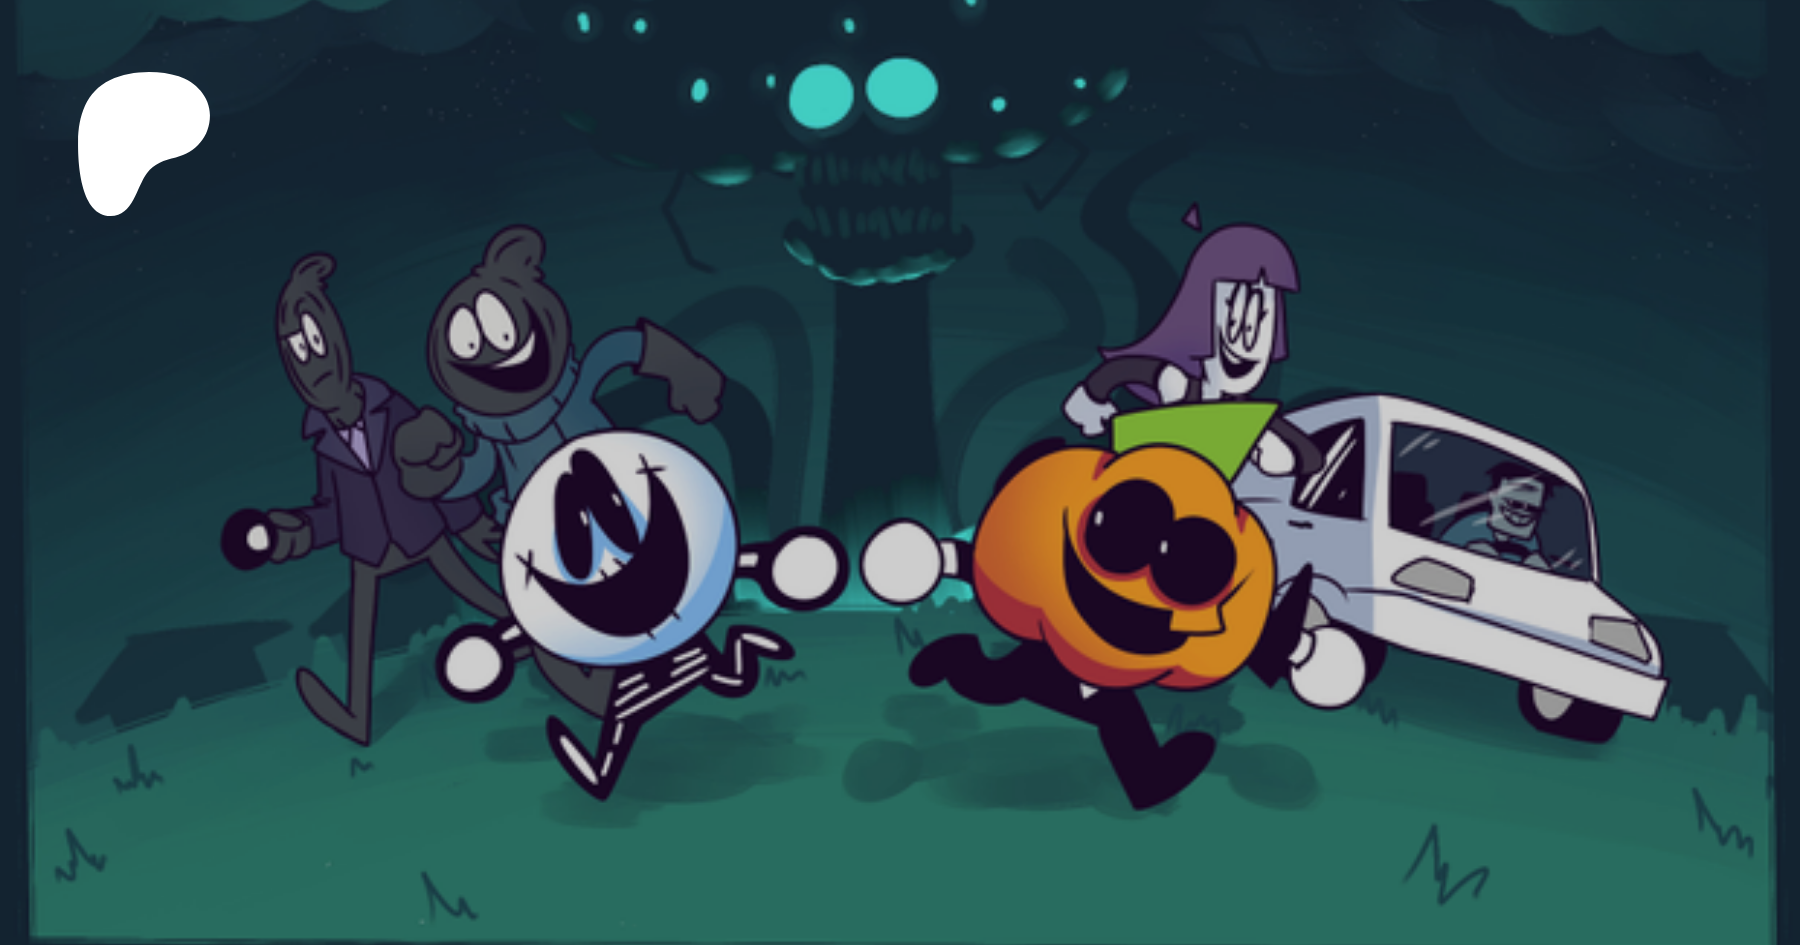 Spooky Month 2: The Stars Behind scenes [pt 2]